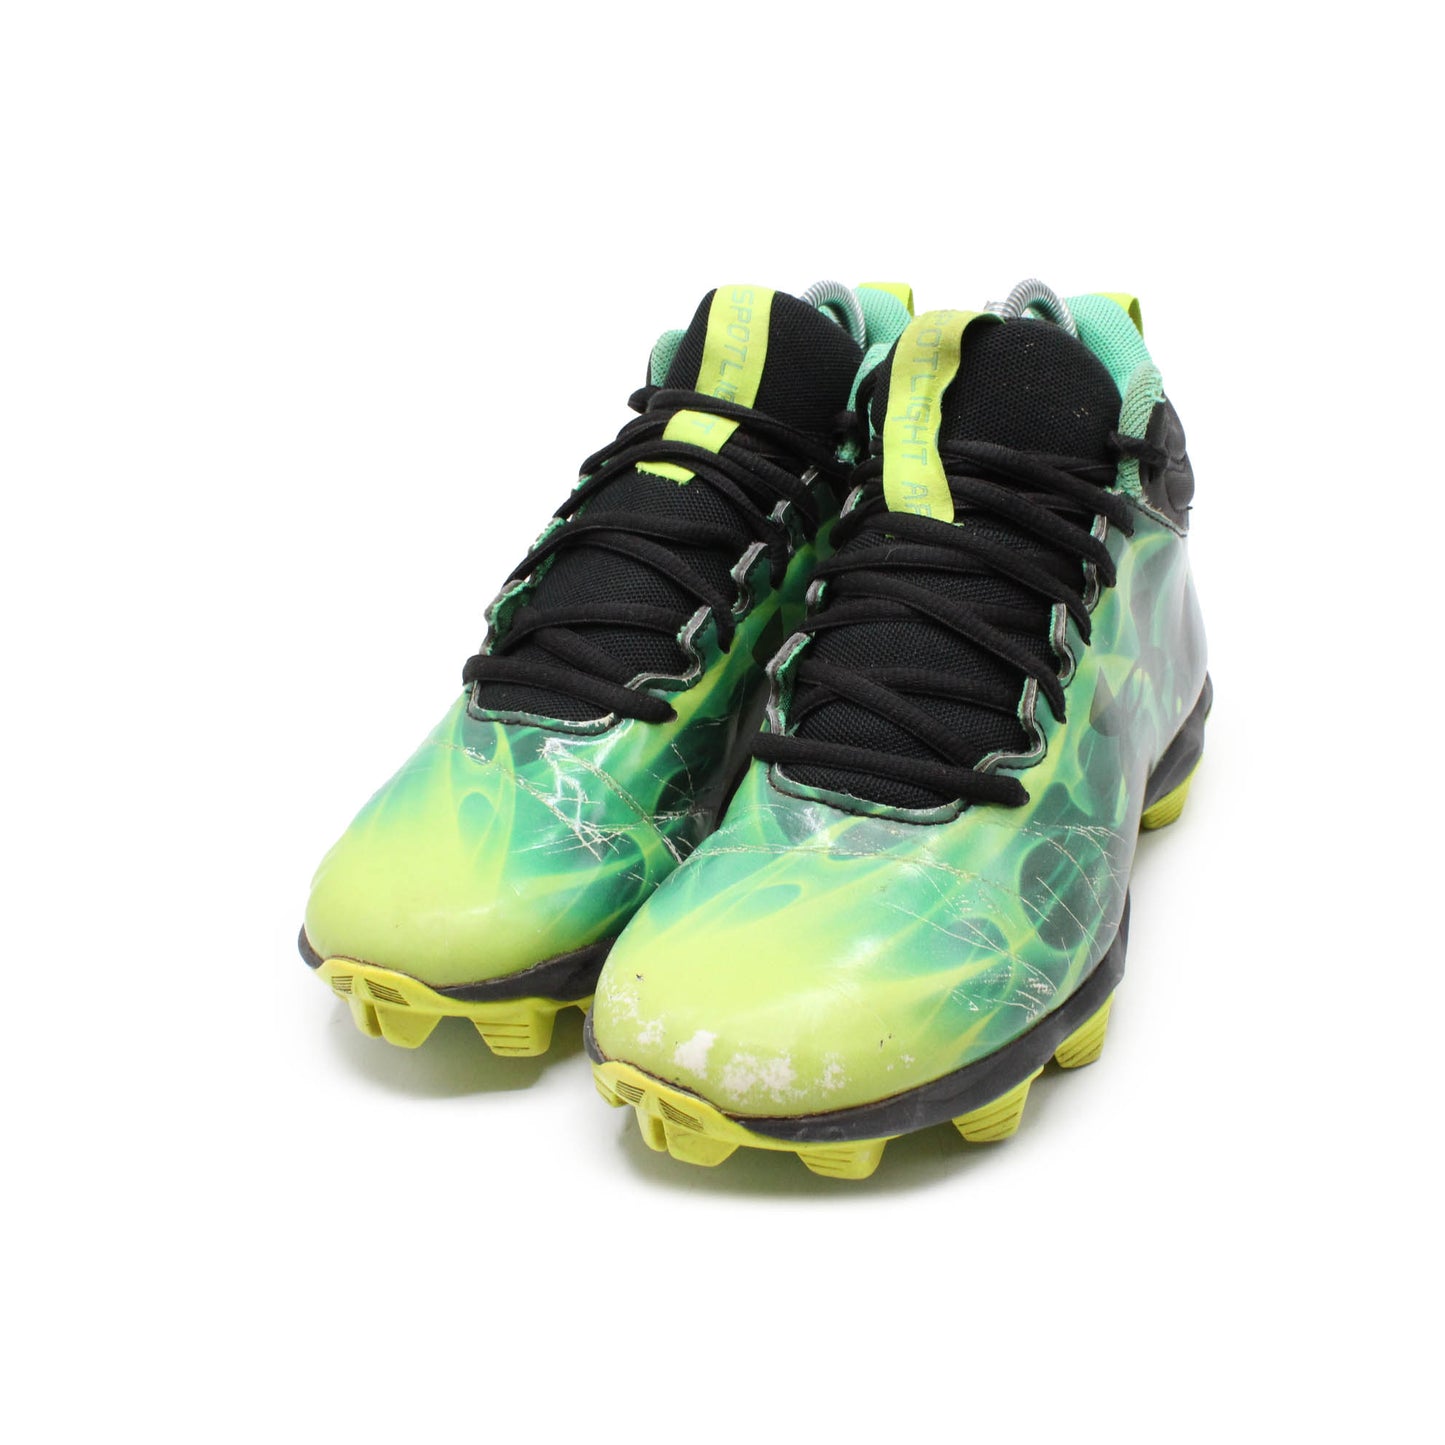 Under Armour Spotlight Franchise RM GS Football Cleat